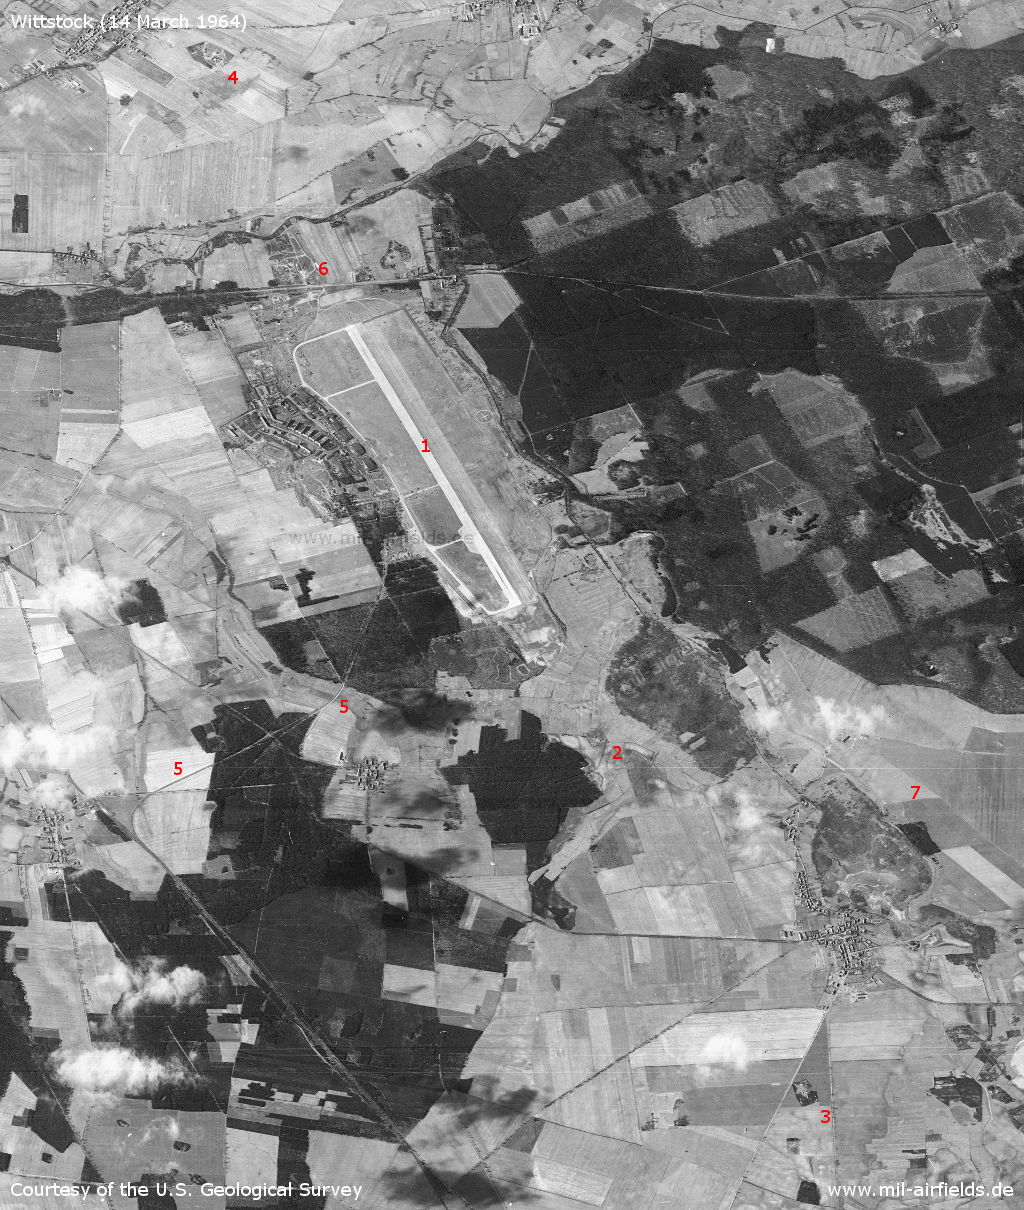 Wittstock Soviet Air Base, Germany, on a US satellite image 1964